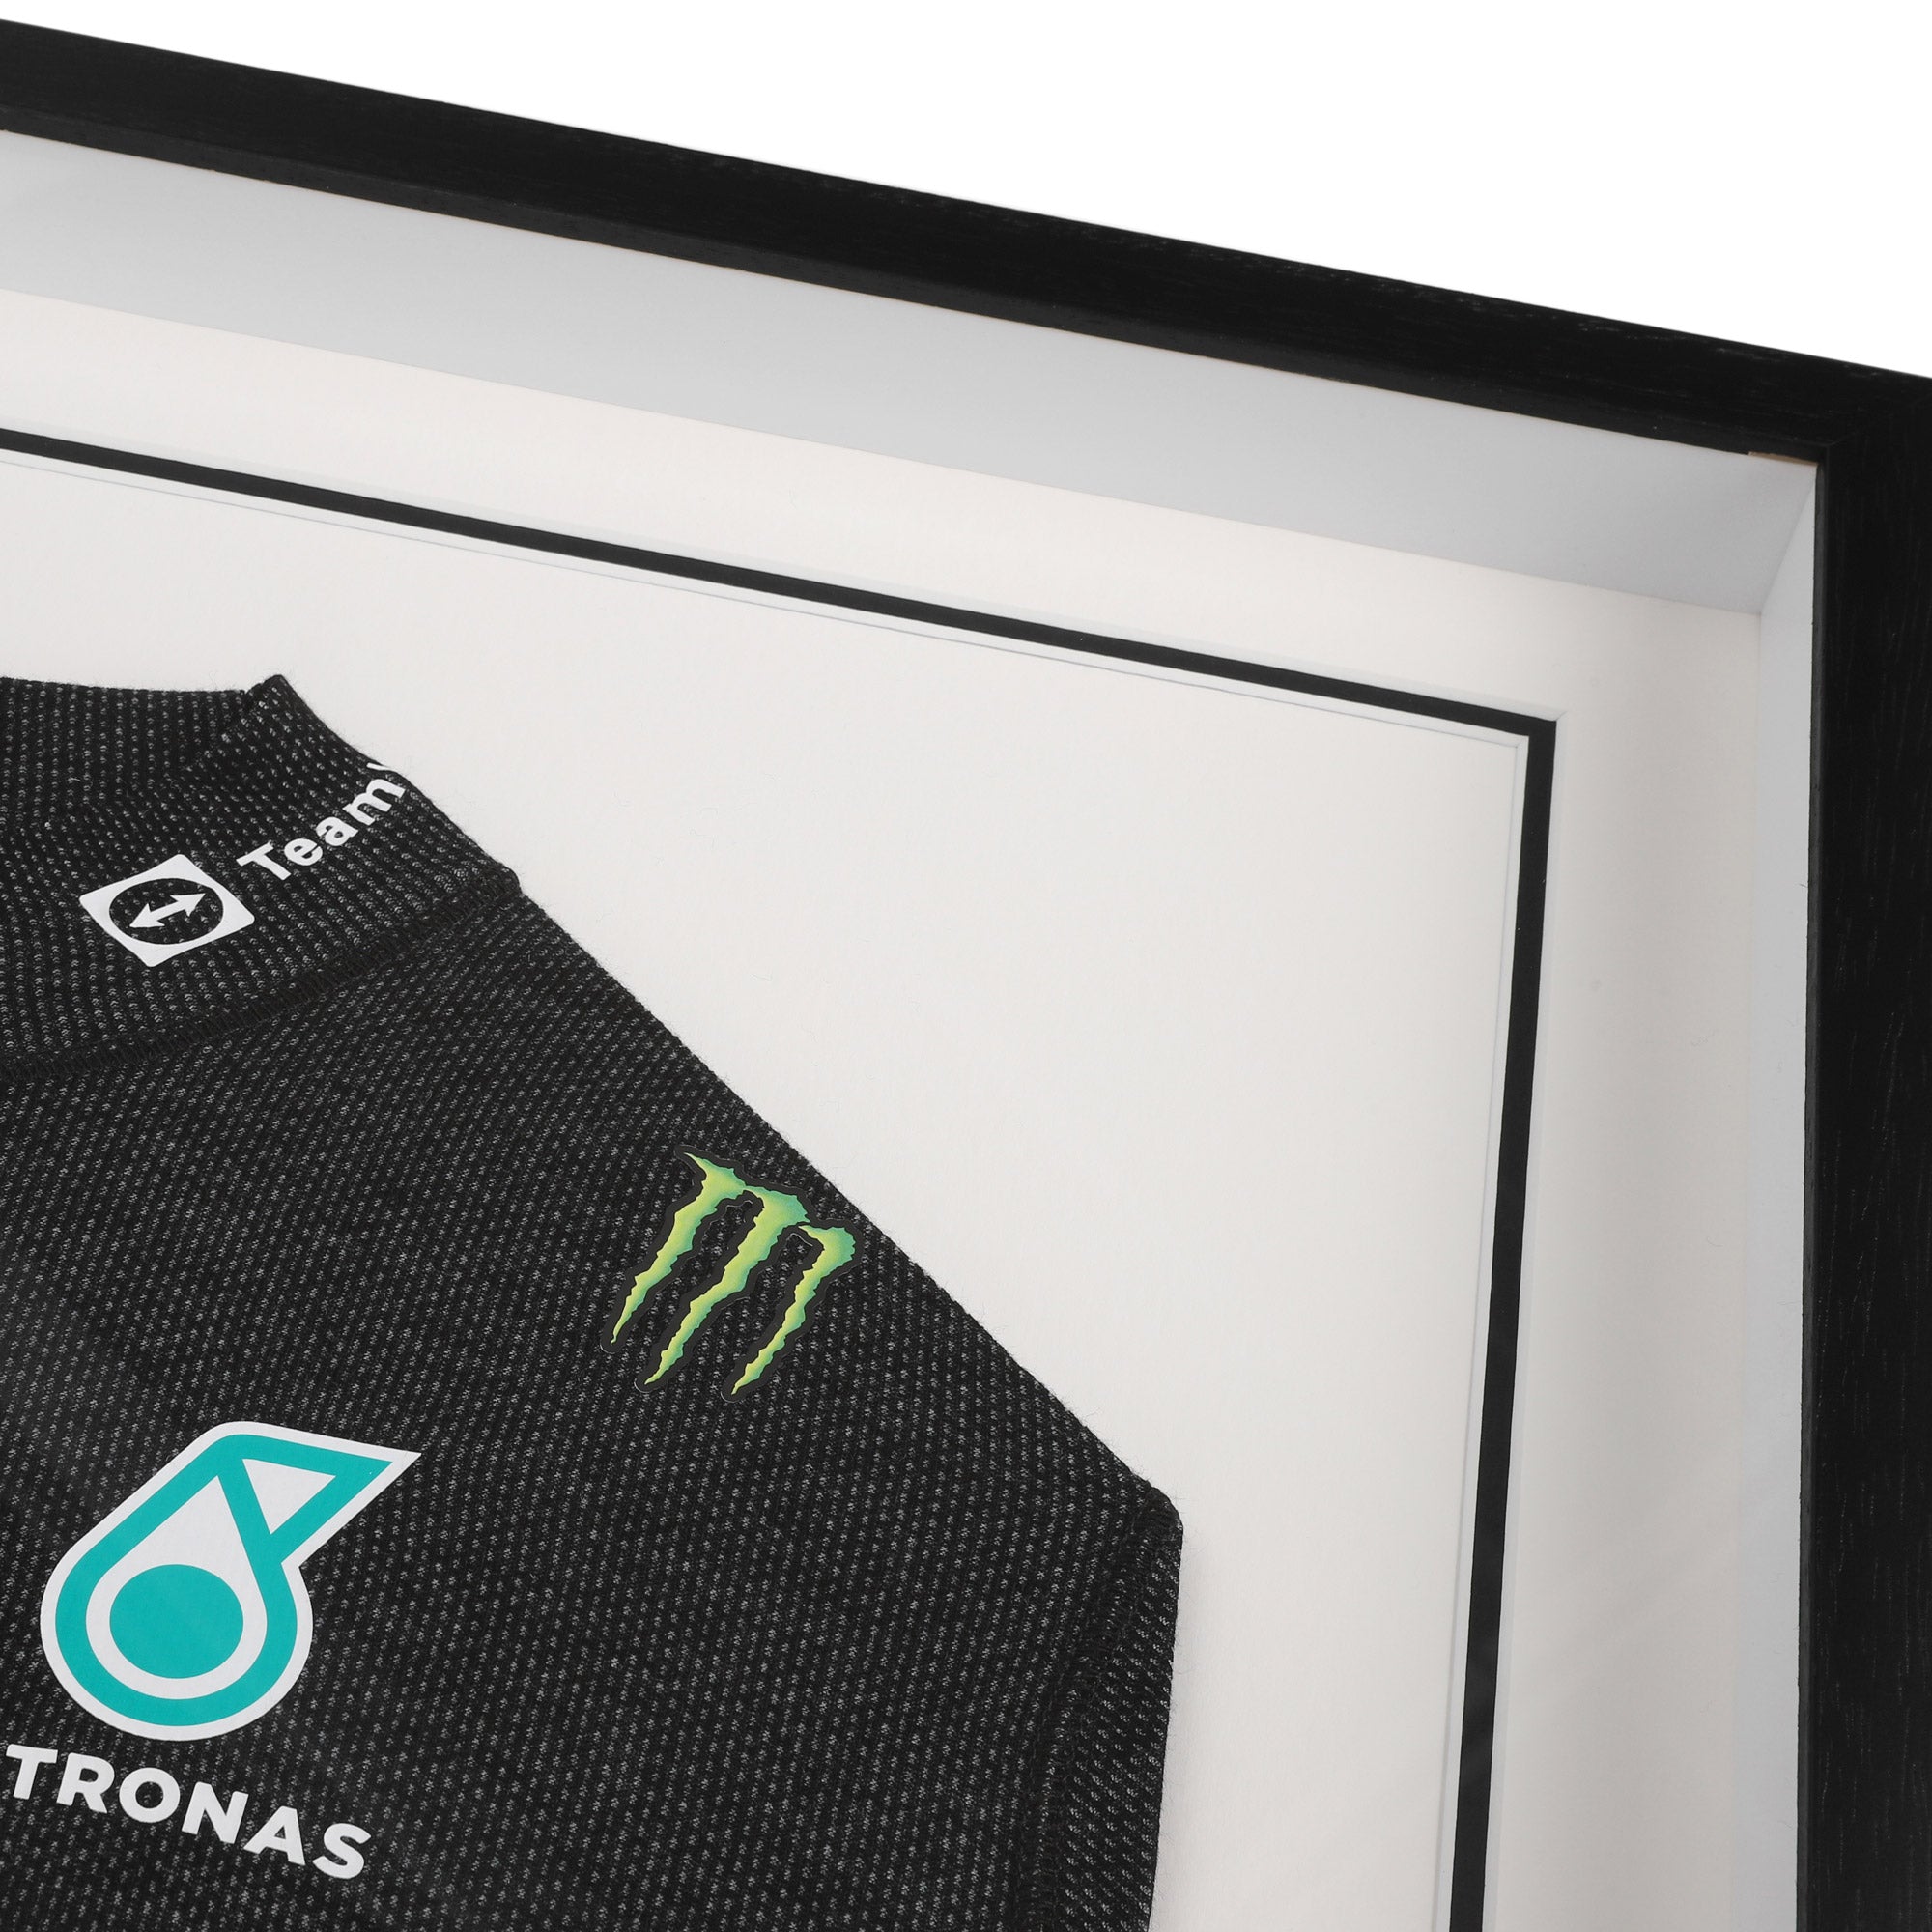 Officially Licensed 2023 Mercedes-AMG Petronas F1 Team Nomex Top - George Russell Edition